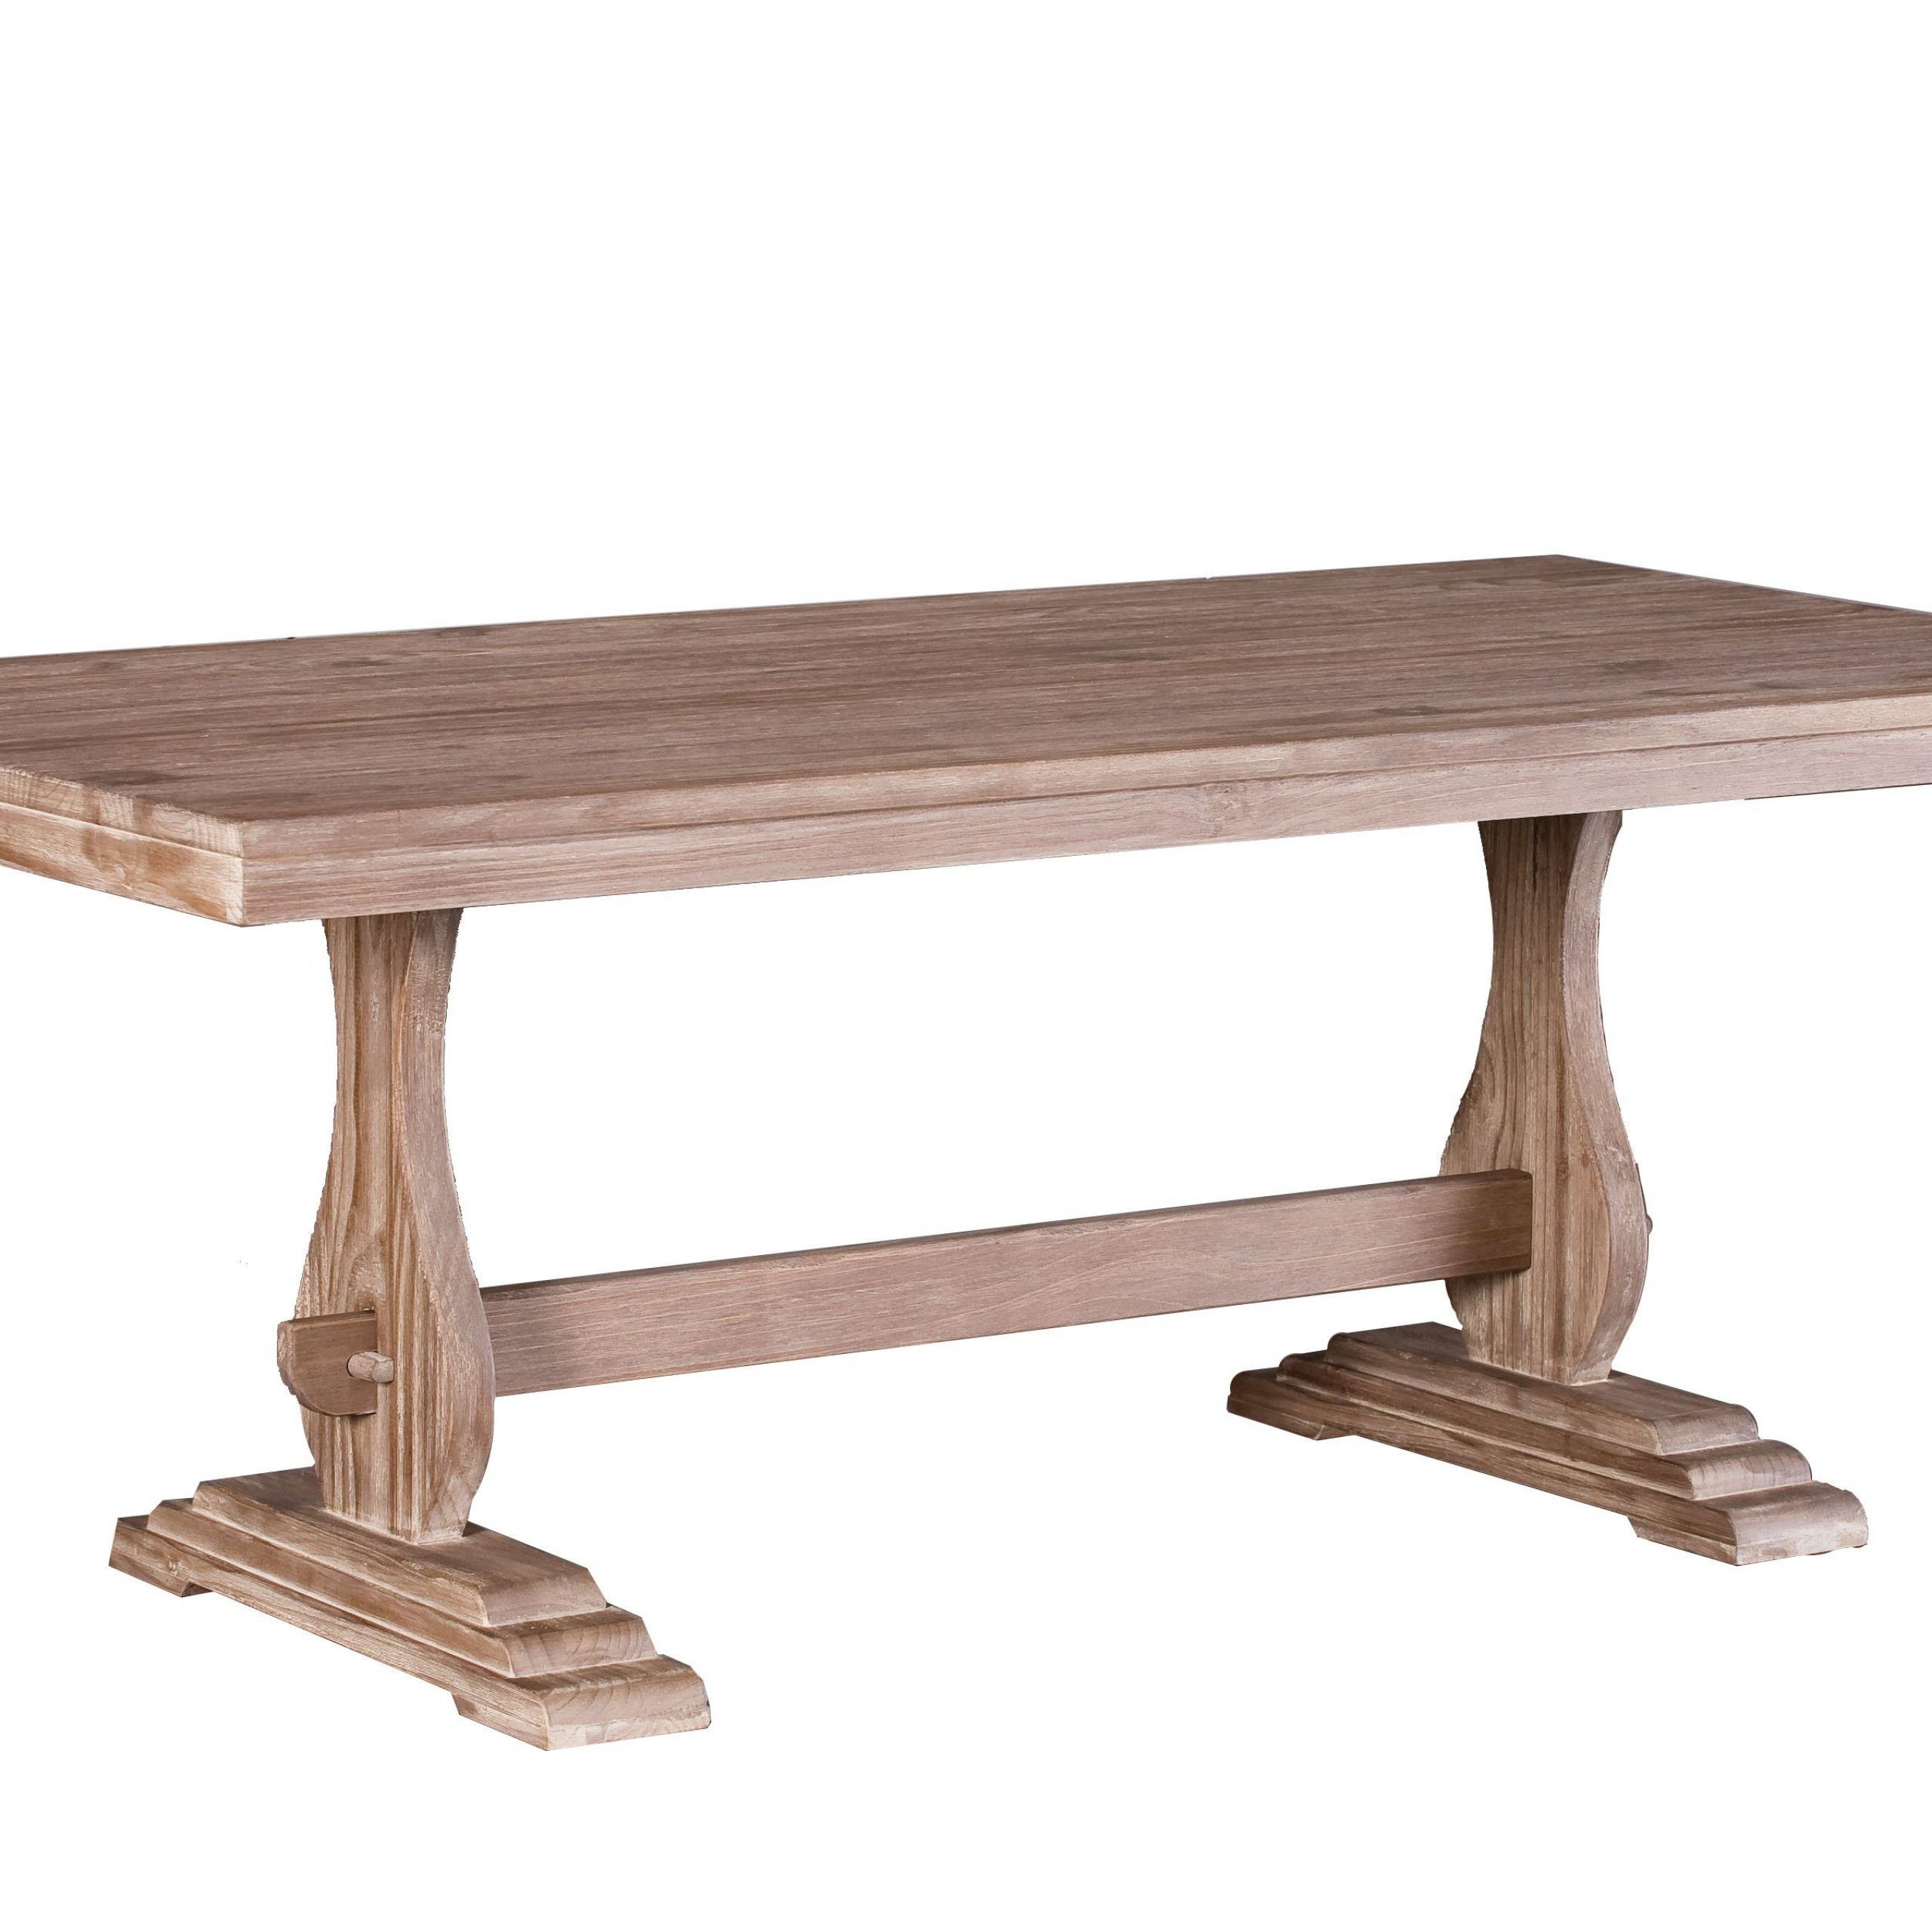 Parkmore Reclaimed Wood Extending Dining Tables Intended For 2019 Driftwood Dining Table, Rustic Chick, Solid Wood (View 3 of 25)